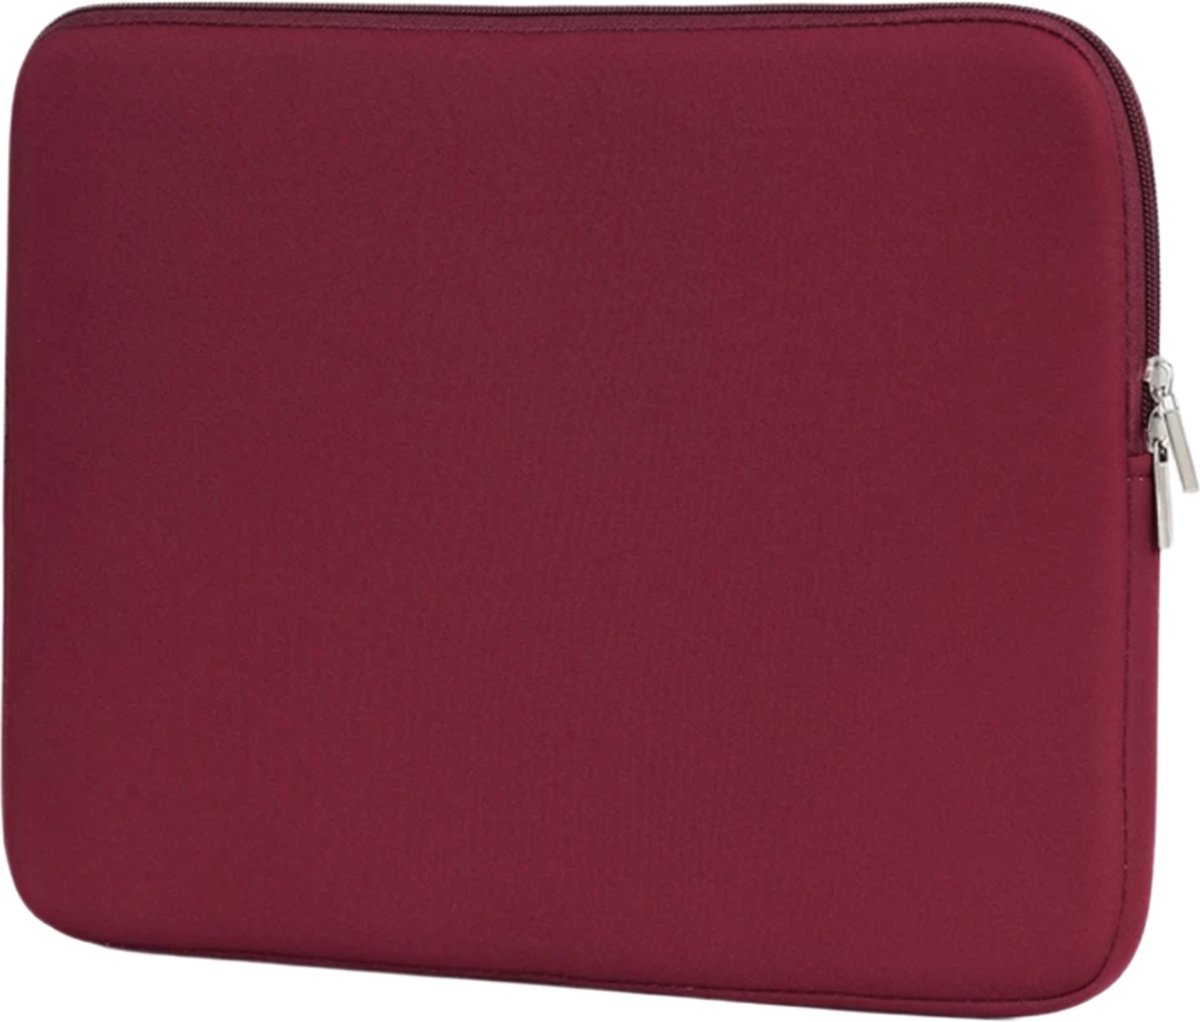 Sleeve - extra bescherming – soft touch – 14,6 inch – laptopcase/tas- bordeaux rood - Dubbele Ritssluiting